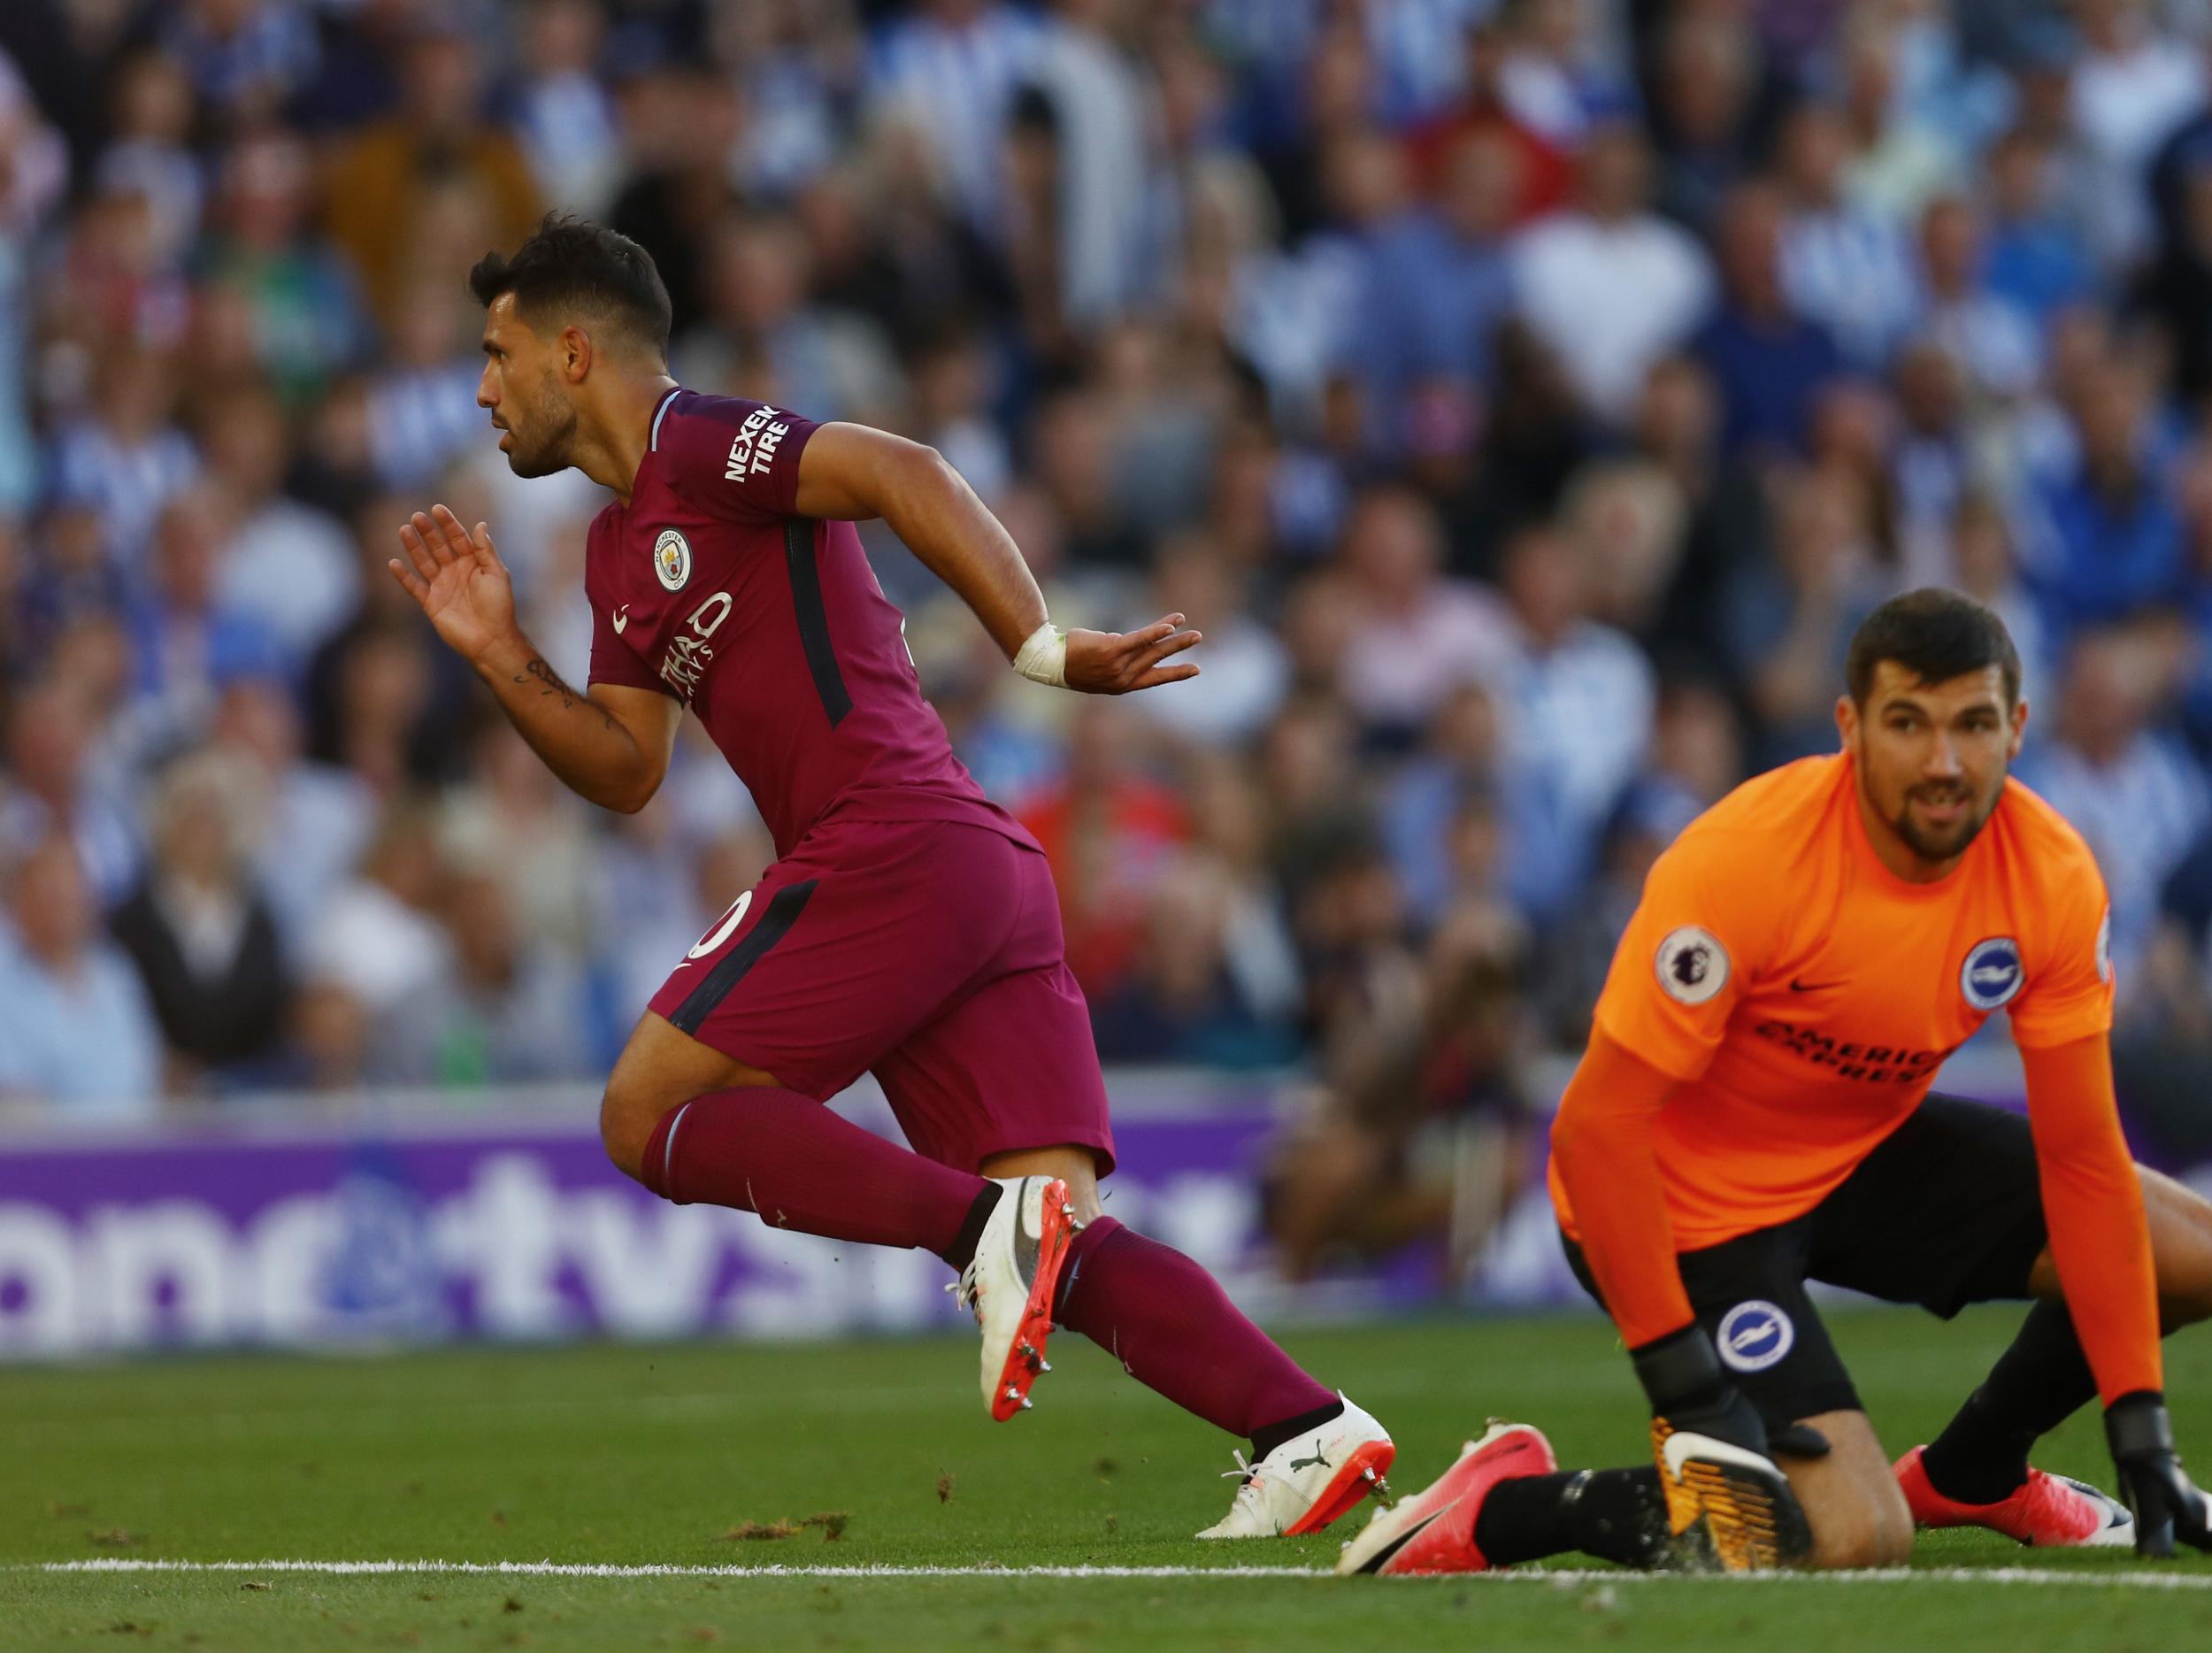 Aguero opened his 2017/18 account in City's 2-0 win